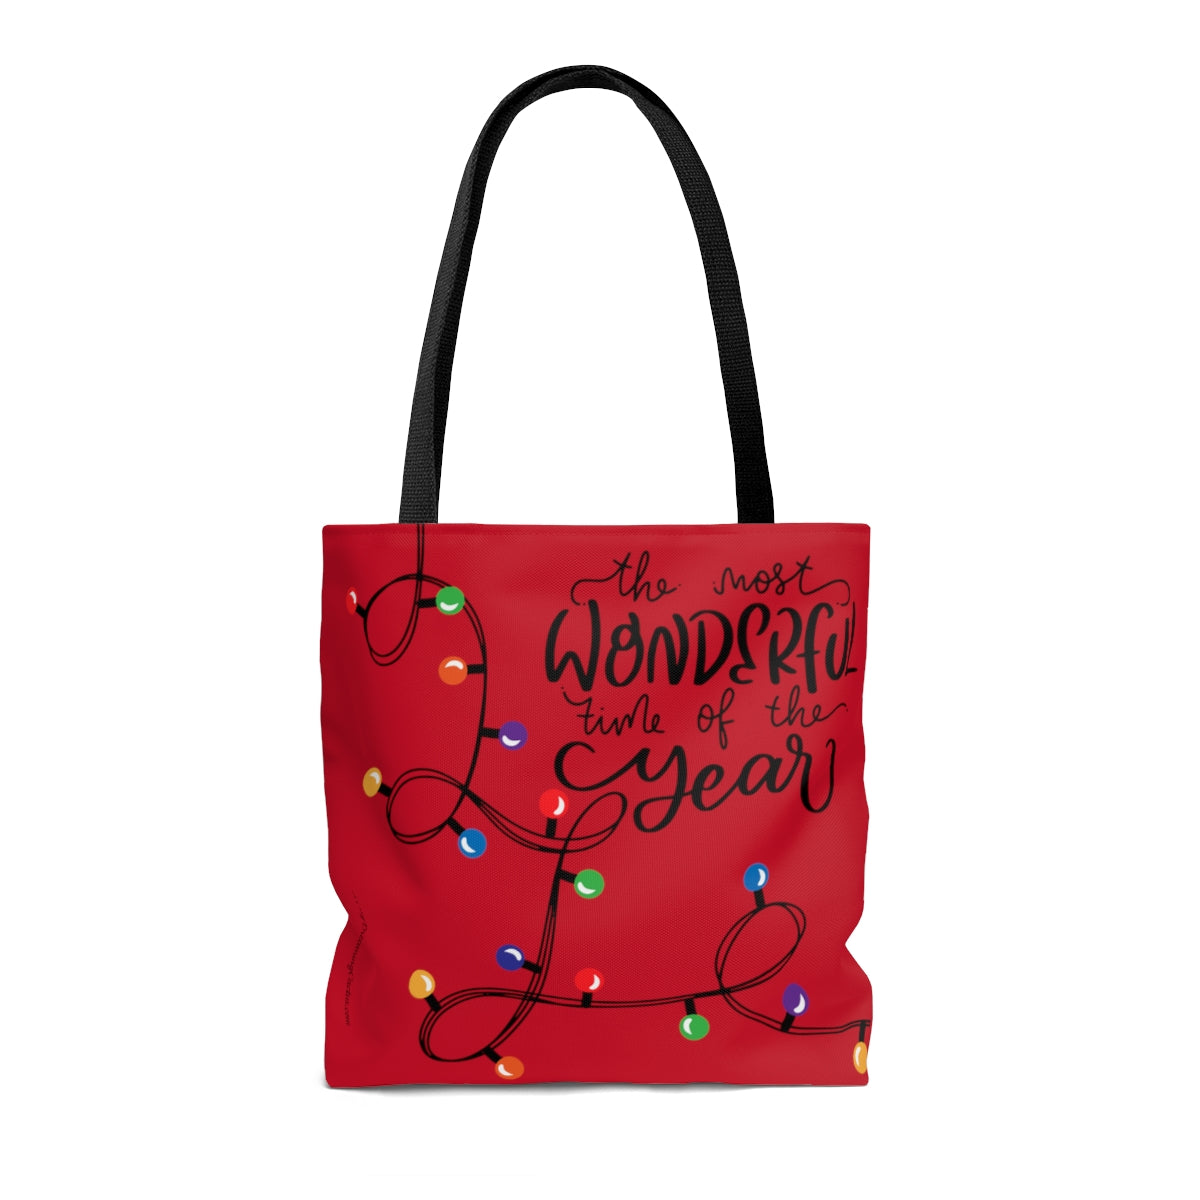 The Most Wonderful Time of Year Red Tote Bag - Travel Grocery Carry-on